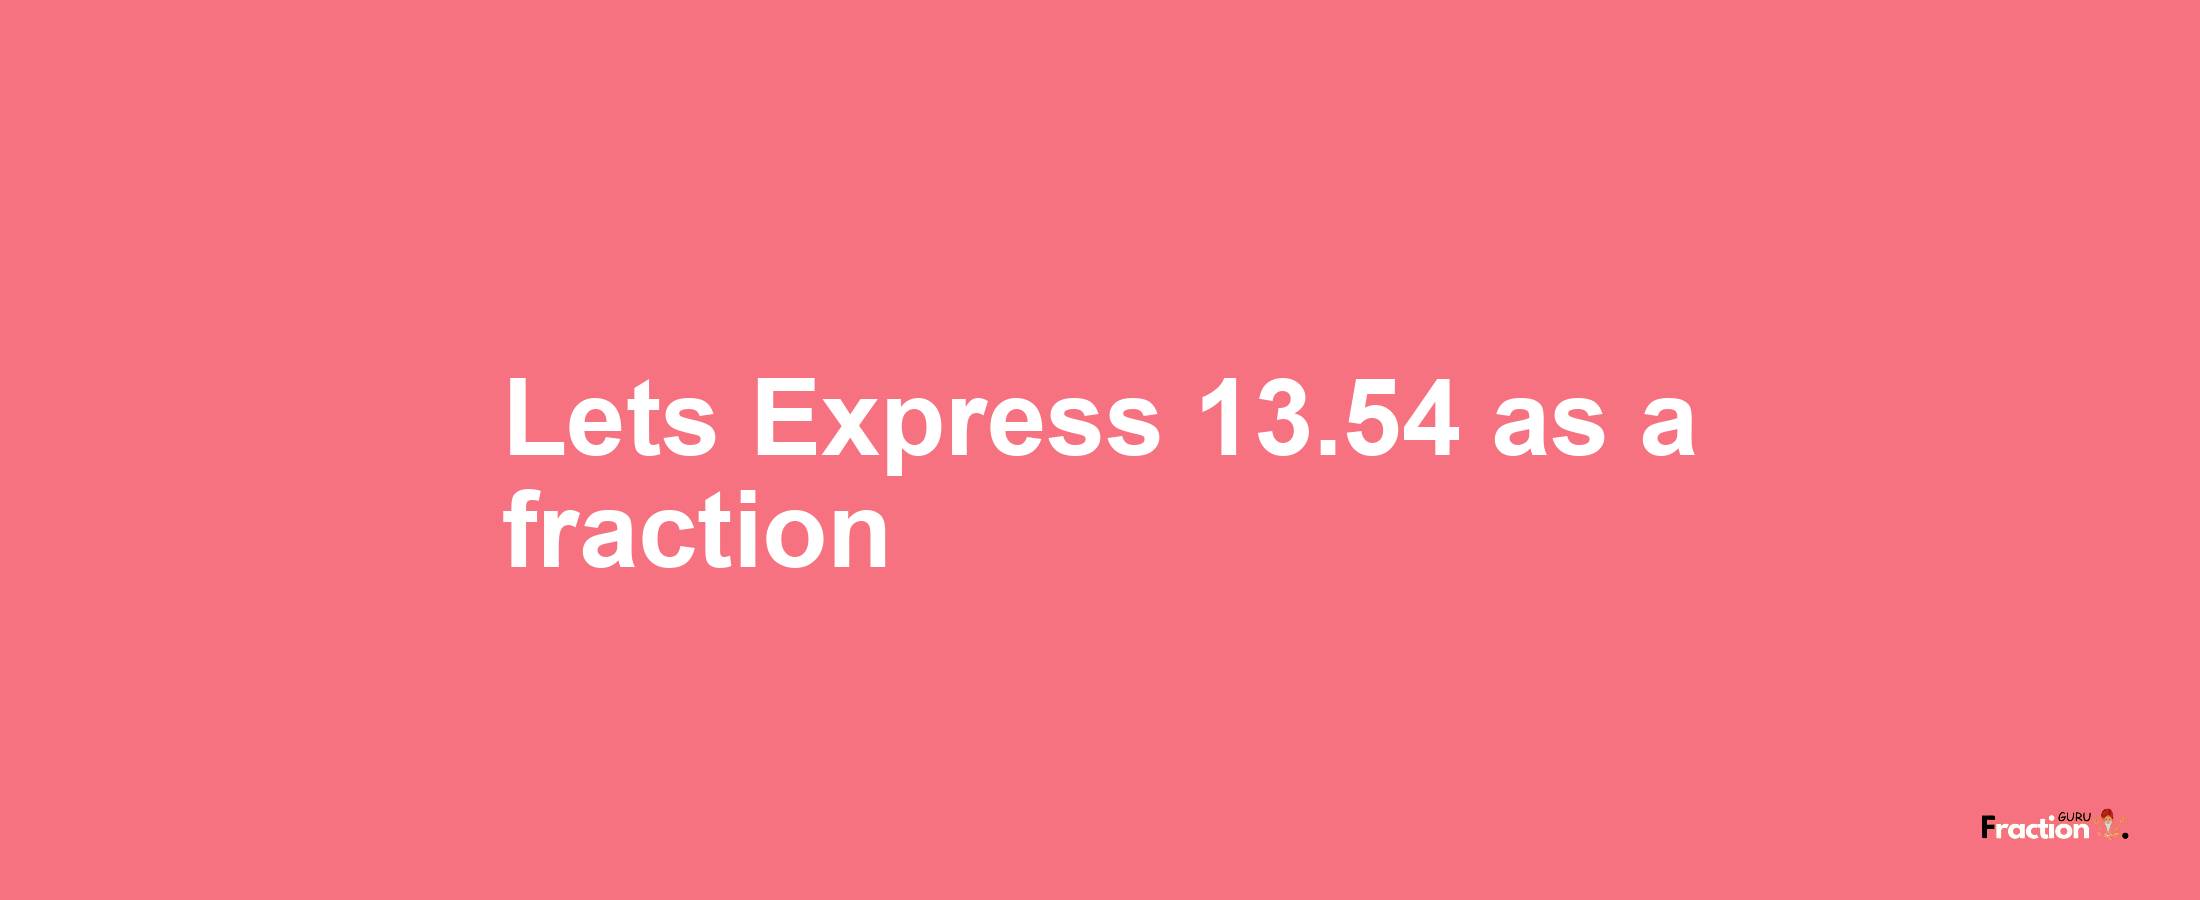 Lets Express 13.54 as afraction